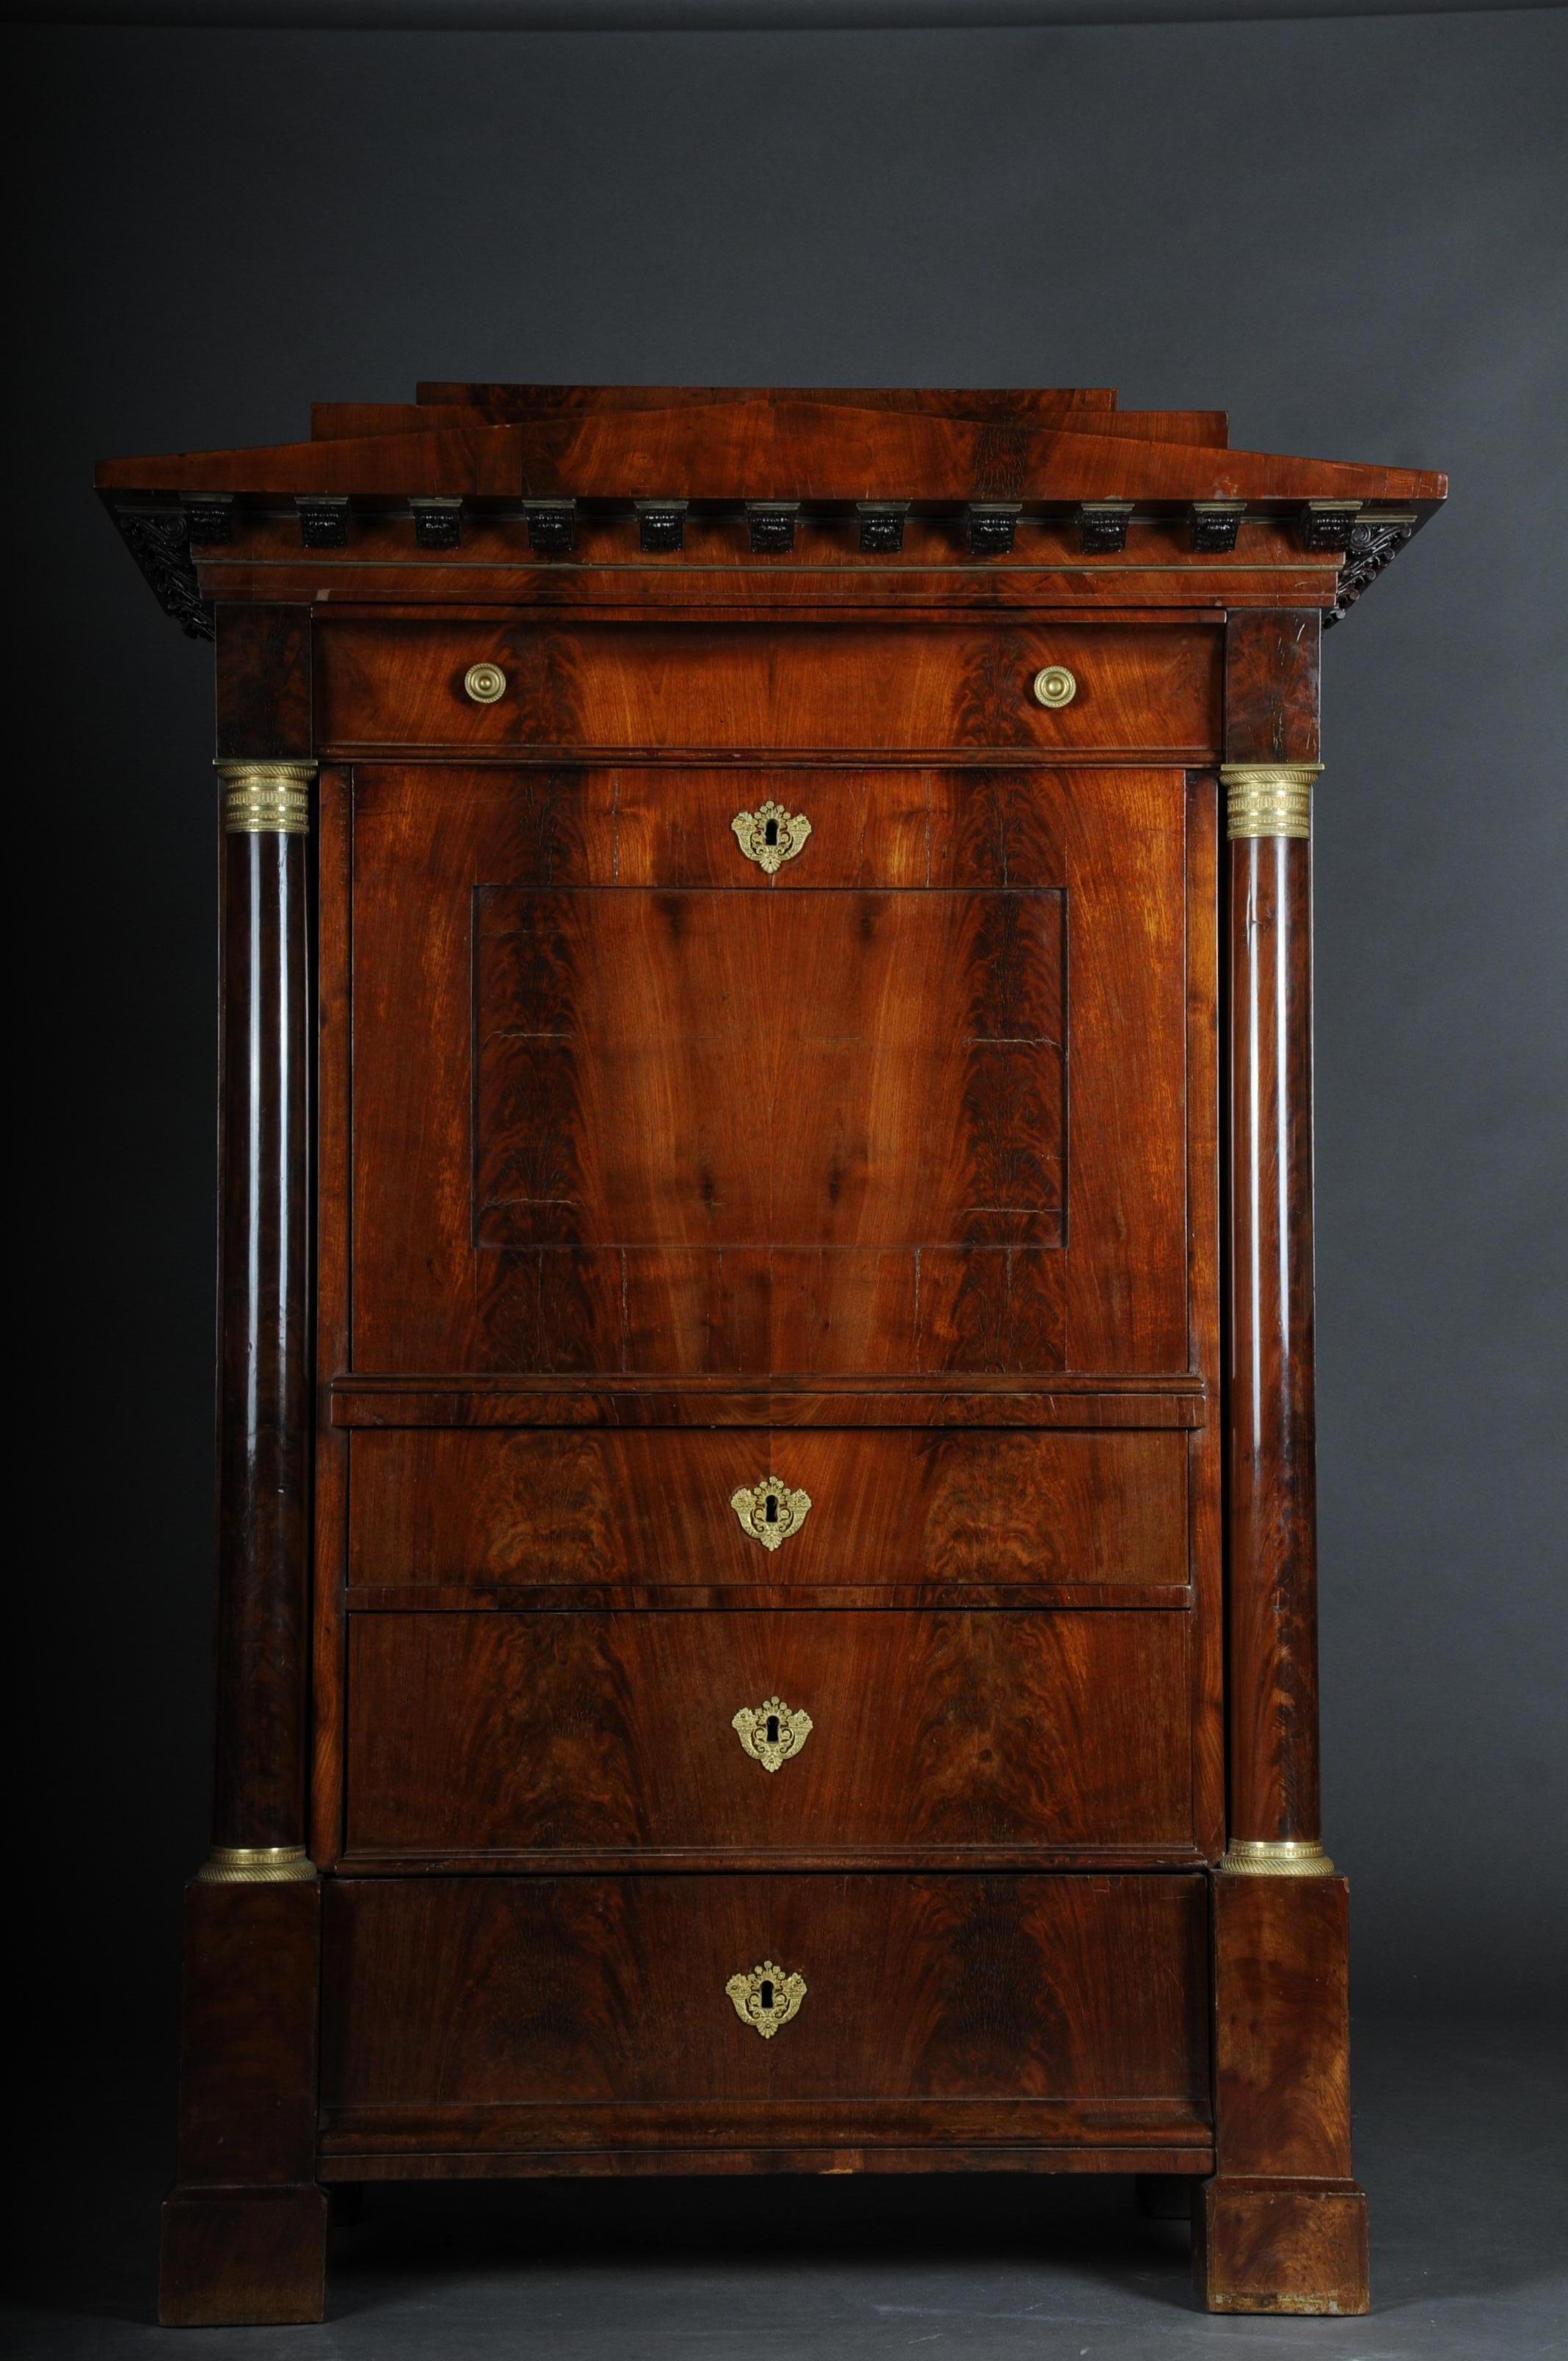 Museum Biedermeier secretary signed by Adolph Friedrich Voigt, circa 1825

Fire-gilt fittings. High quality Cuba mahogany on solid linden wood. Architecturally structured front. Rectangular body on block feet. Provided with three drawers of